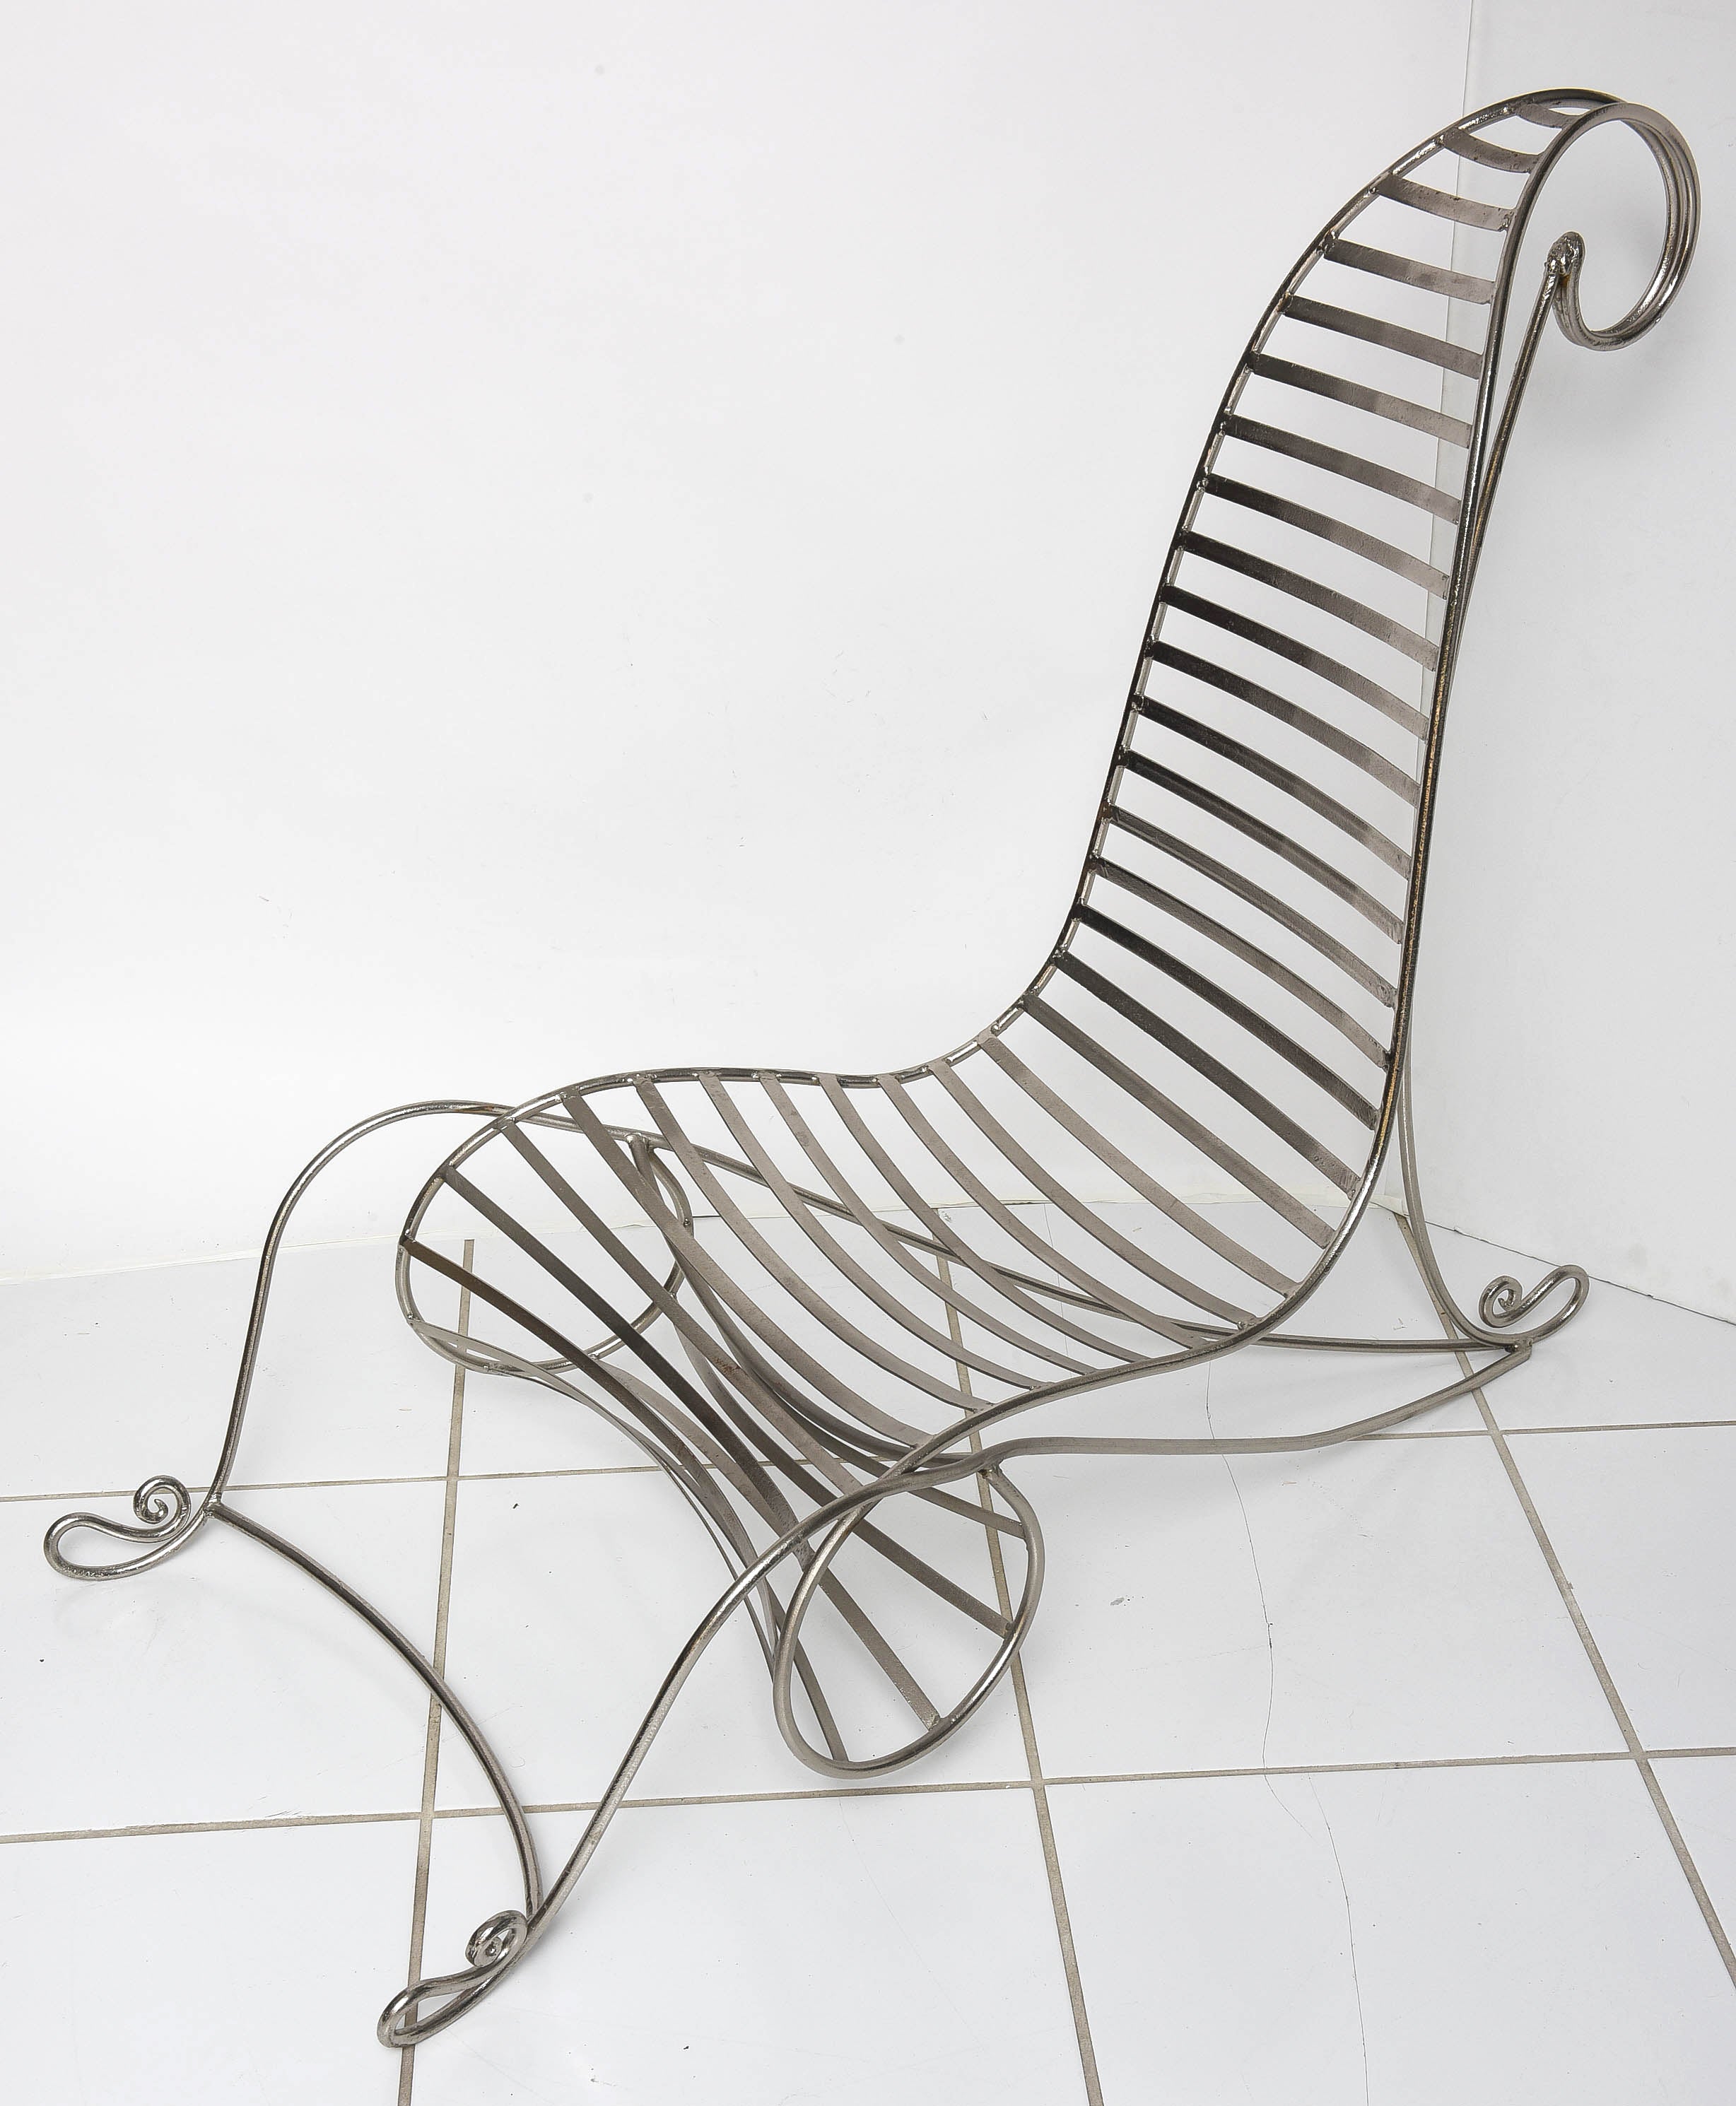 Late 20th Century Chrome Chair in the Style of the Spine Chair after André Dubreuil, circa 1990s For Sale